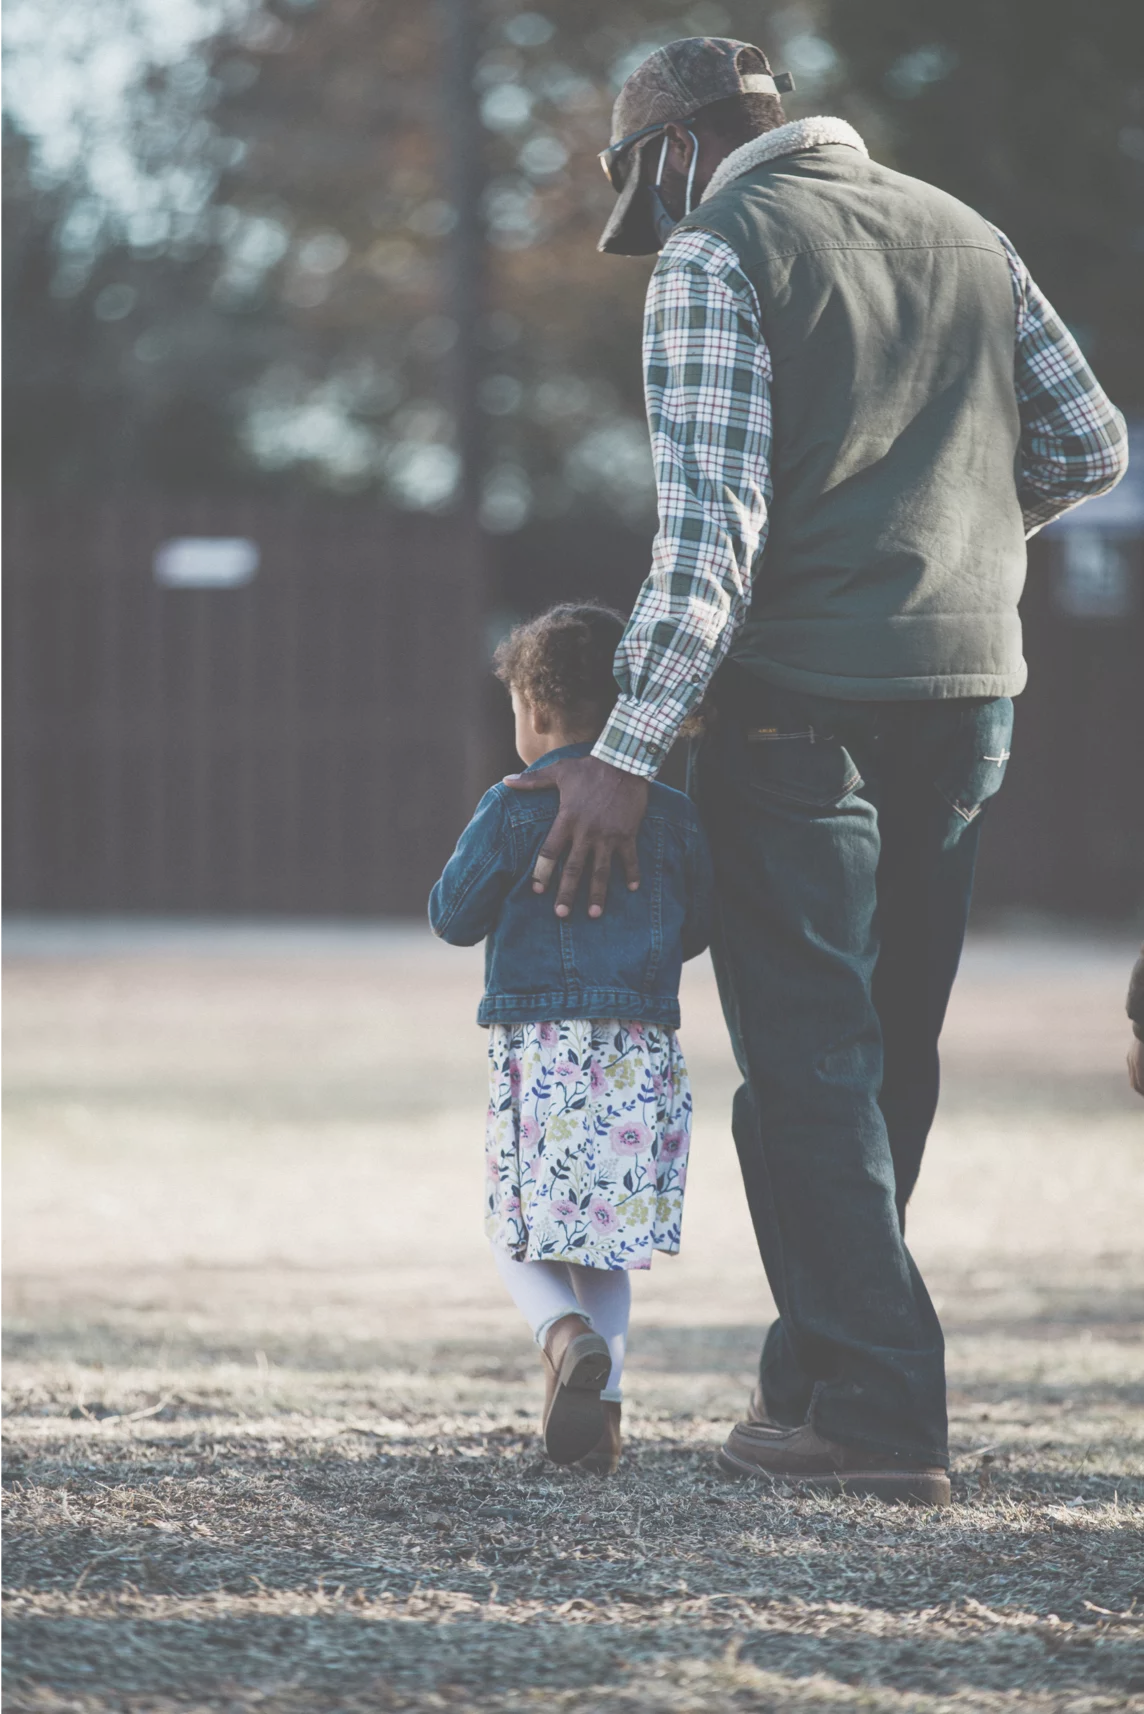 Black man walking with a young girl in a field